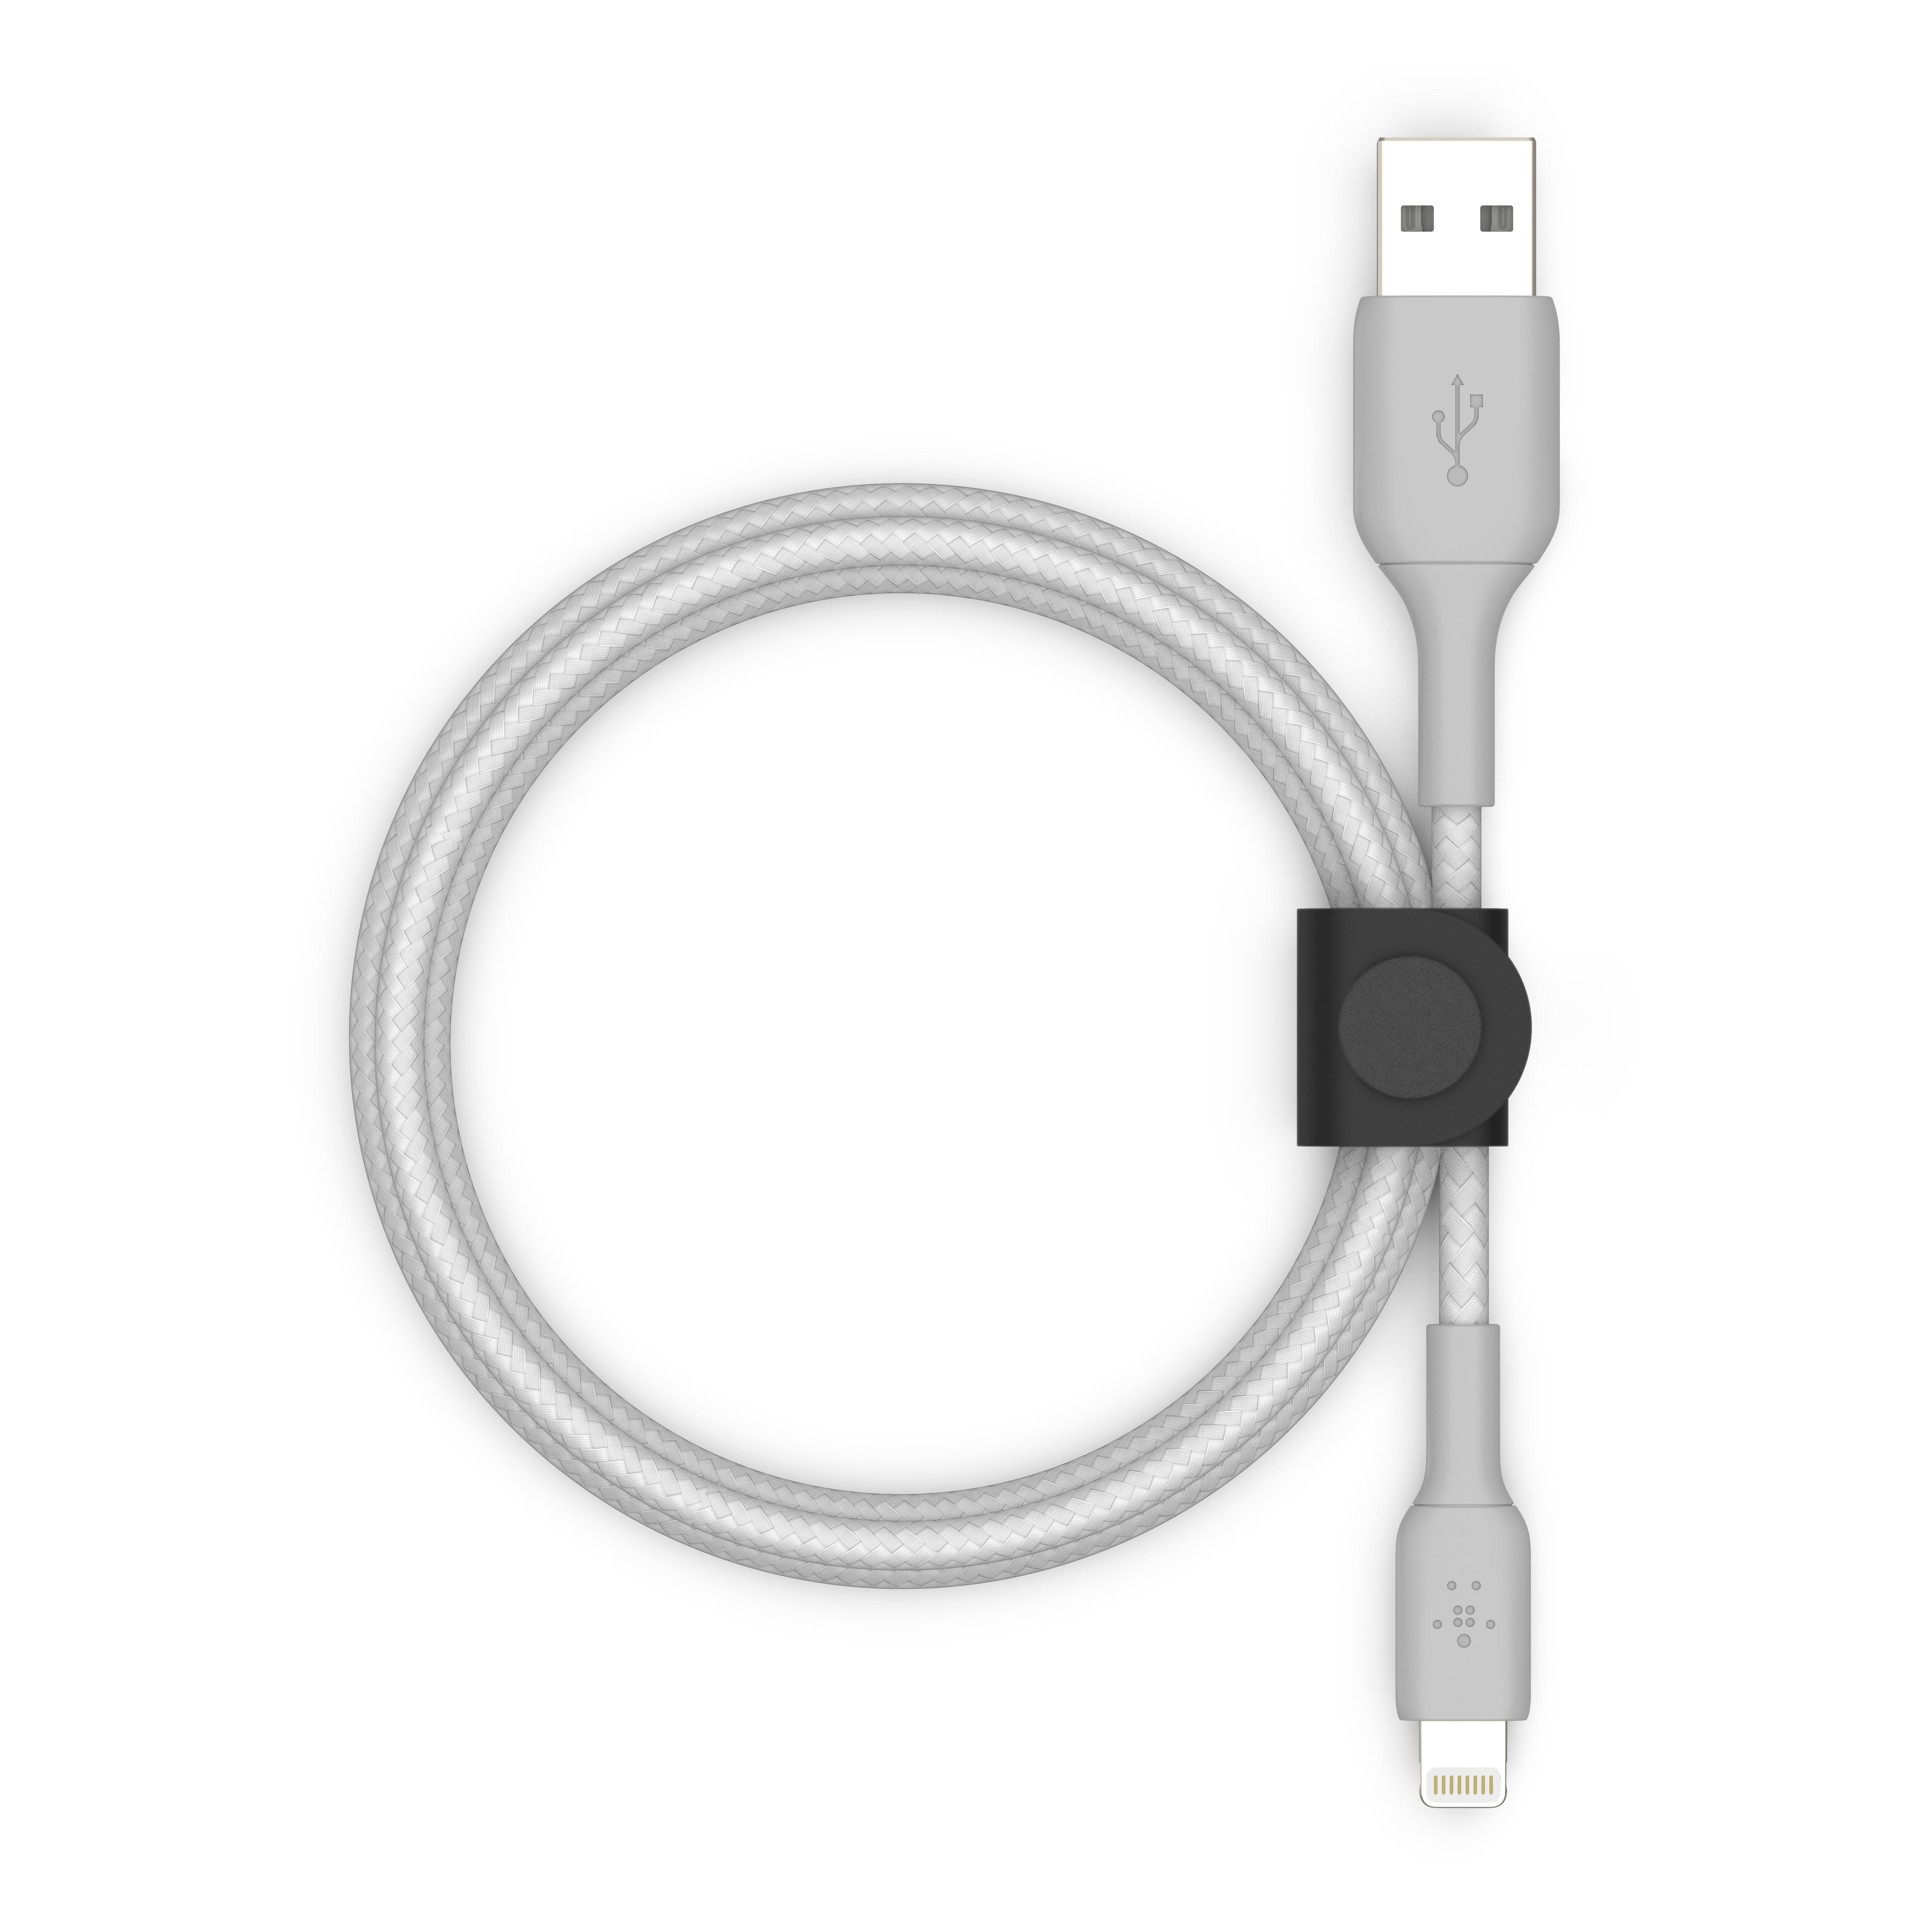 Belkin BoostCharge Braided Lightning Cable - 5FT - MFi Certified Apple iPhone Charger USB to Lightning Cable - iPhone Cable - iPhone Charger Cord - Apple Charger - USB Phone Charger - - Walmart.com